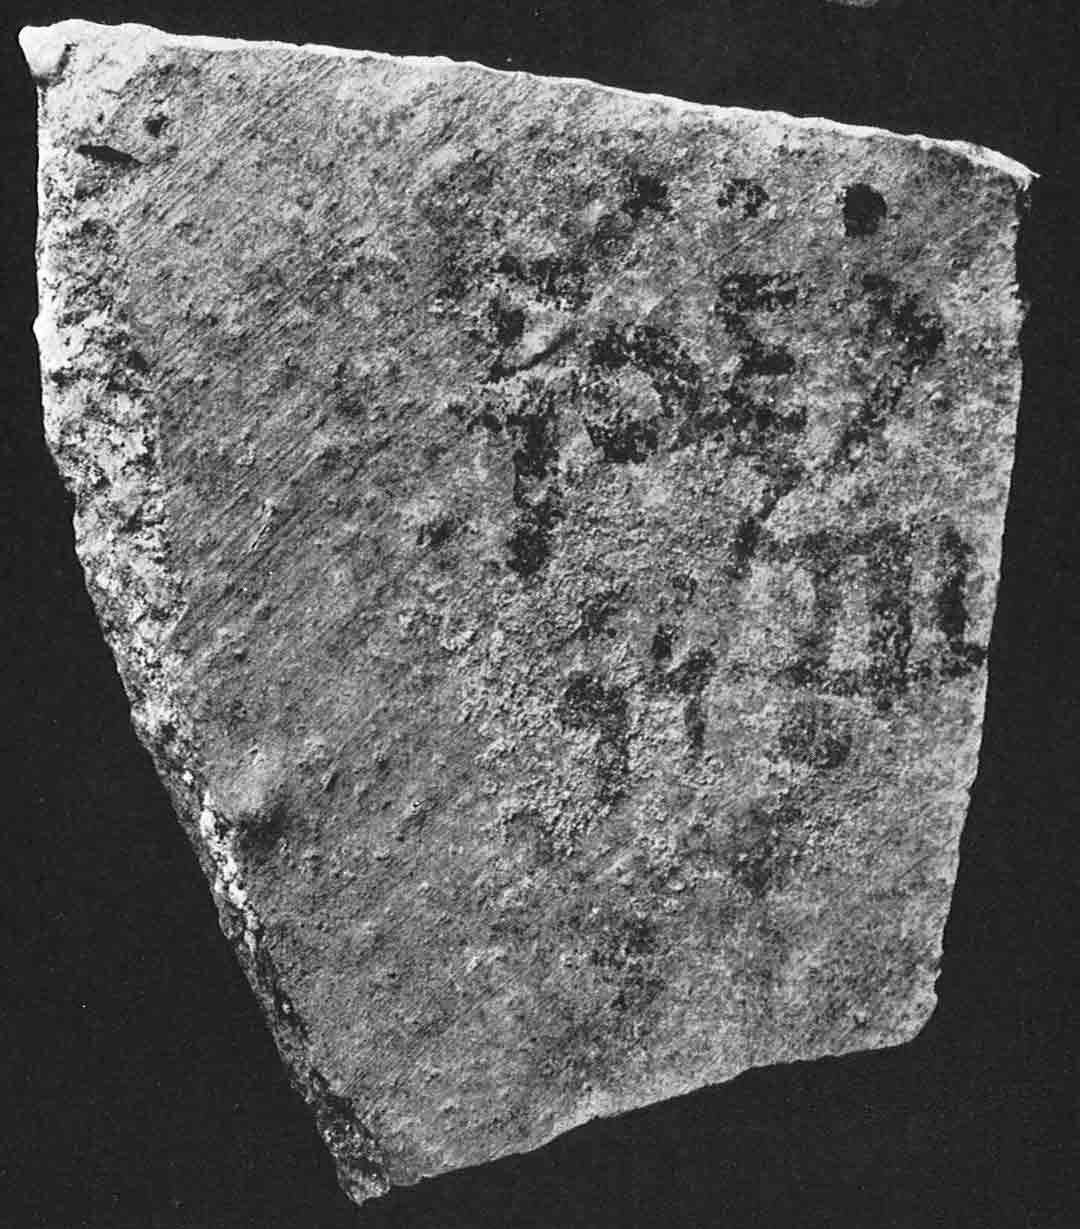 The “Hanan” ostracon from Grant’s excavations at Tel Beth-Shemesh